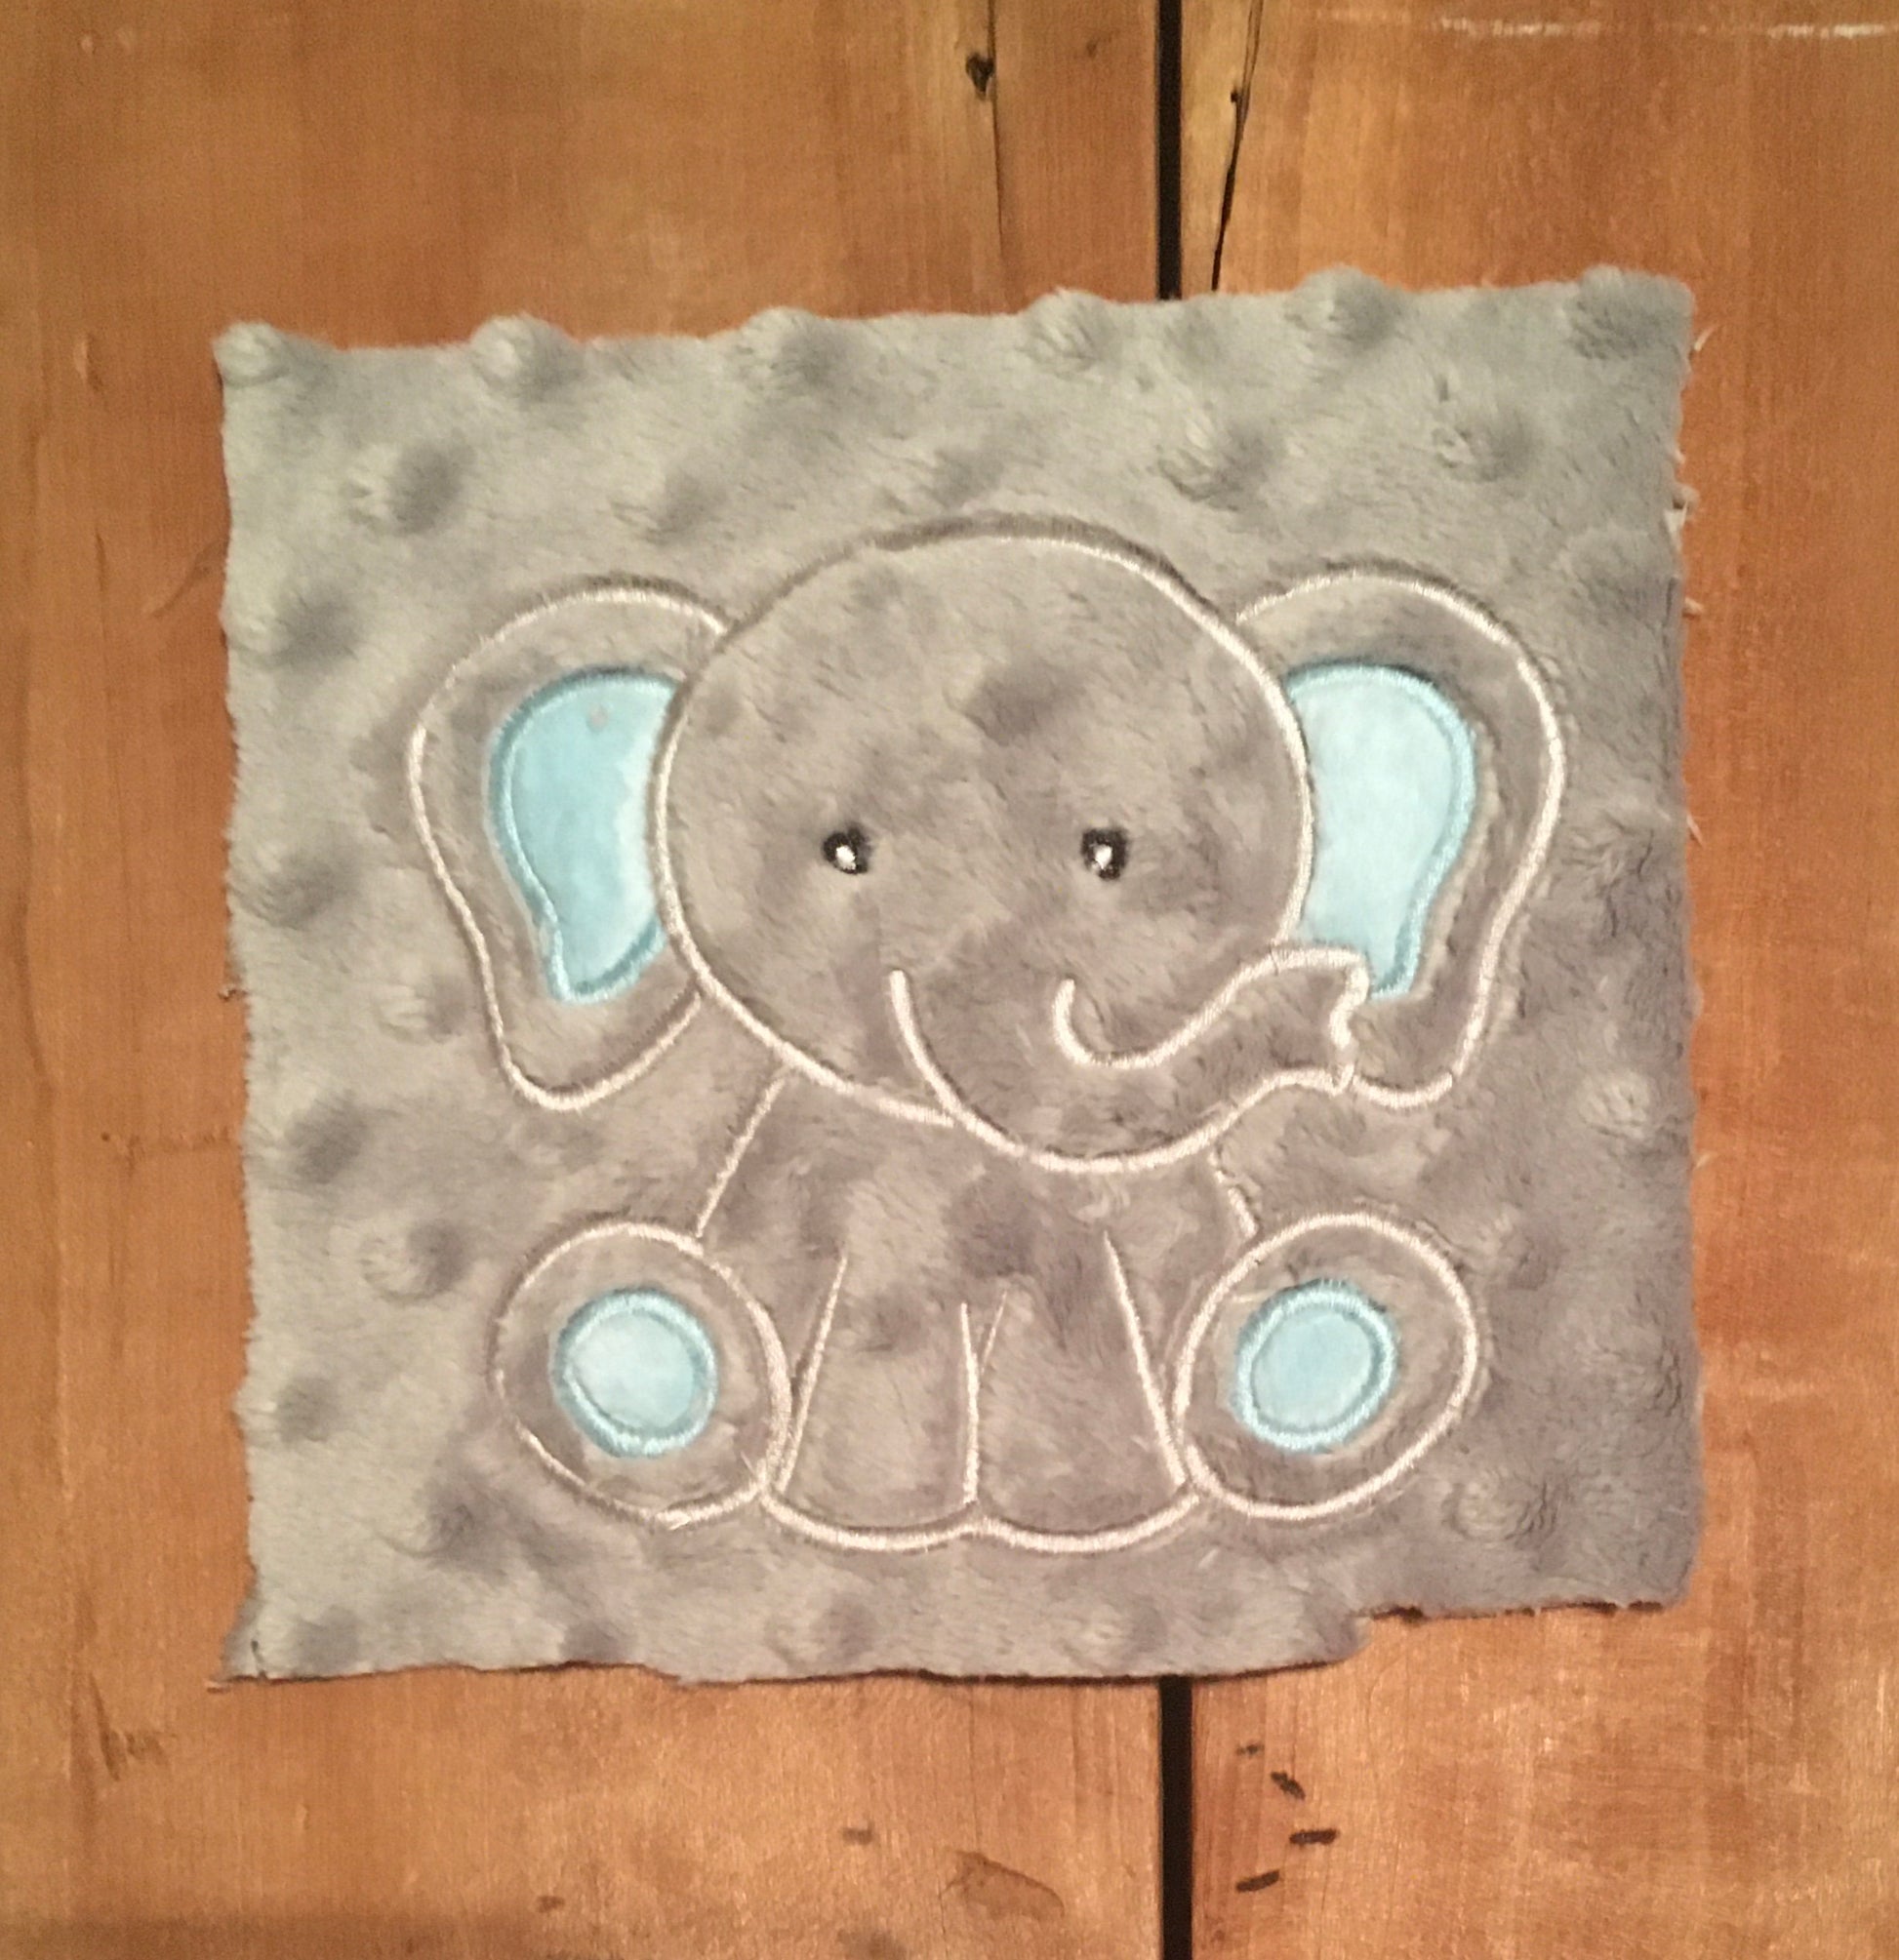 light blue and gray elephant applique on gray minky add to most items